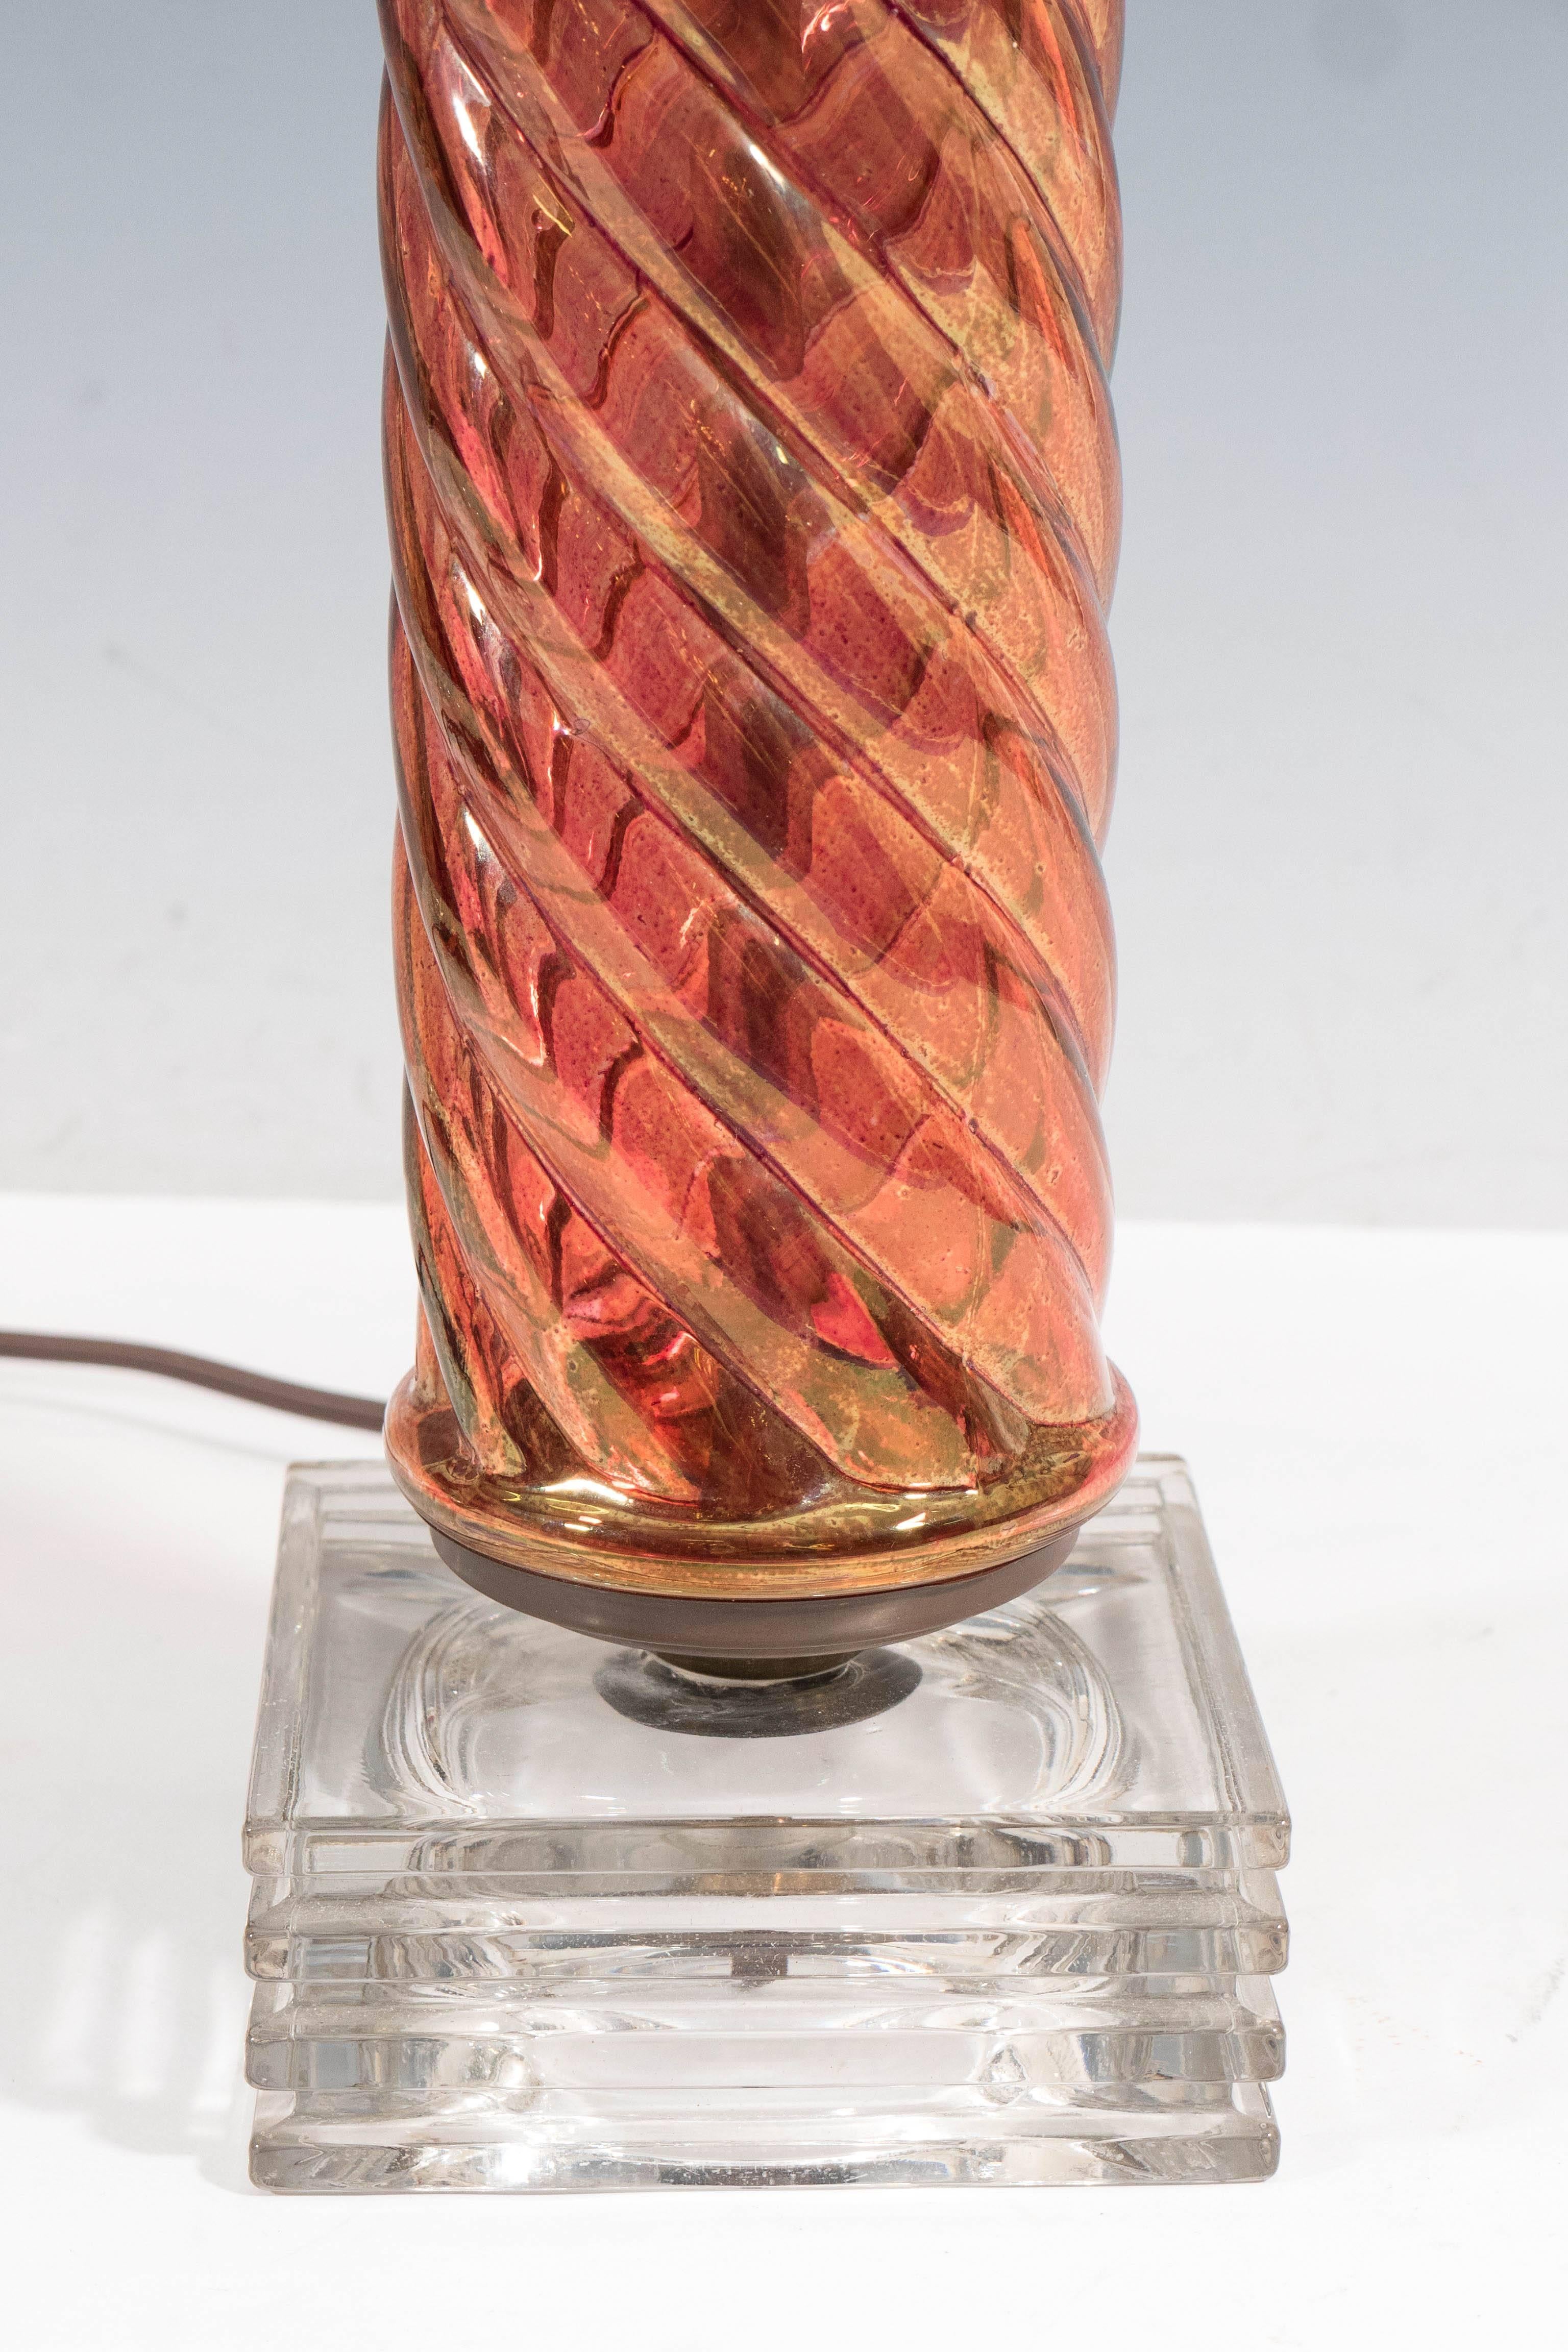 A pair of table lamps, each in iridescent amber toned glass, in the form of serpentine columns, capped with brass, on stepped glass bases. Wiring and sockets to US standard, each requires one Edison base bulb. Good vintage condition, with visible